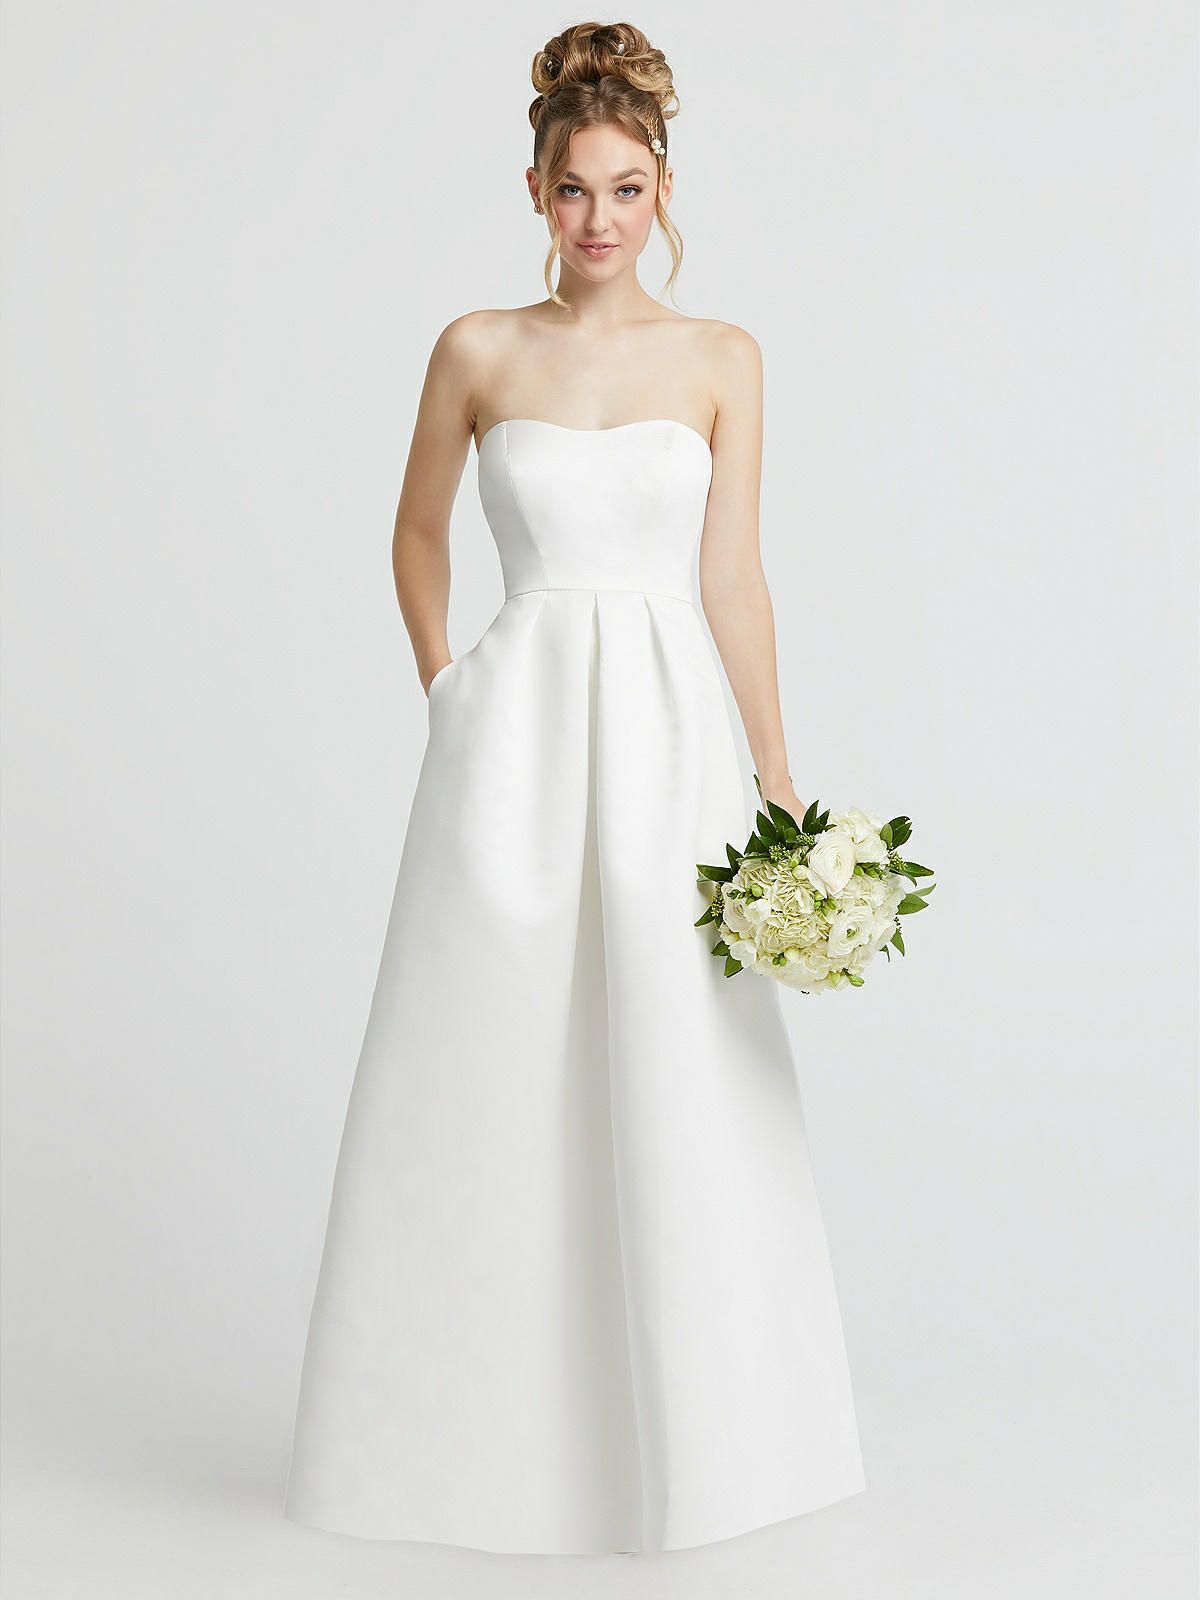 Sweetheart Strapless Satin Wedding Dress with Pockets | The Dessy Group